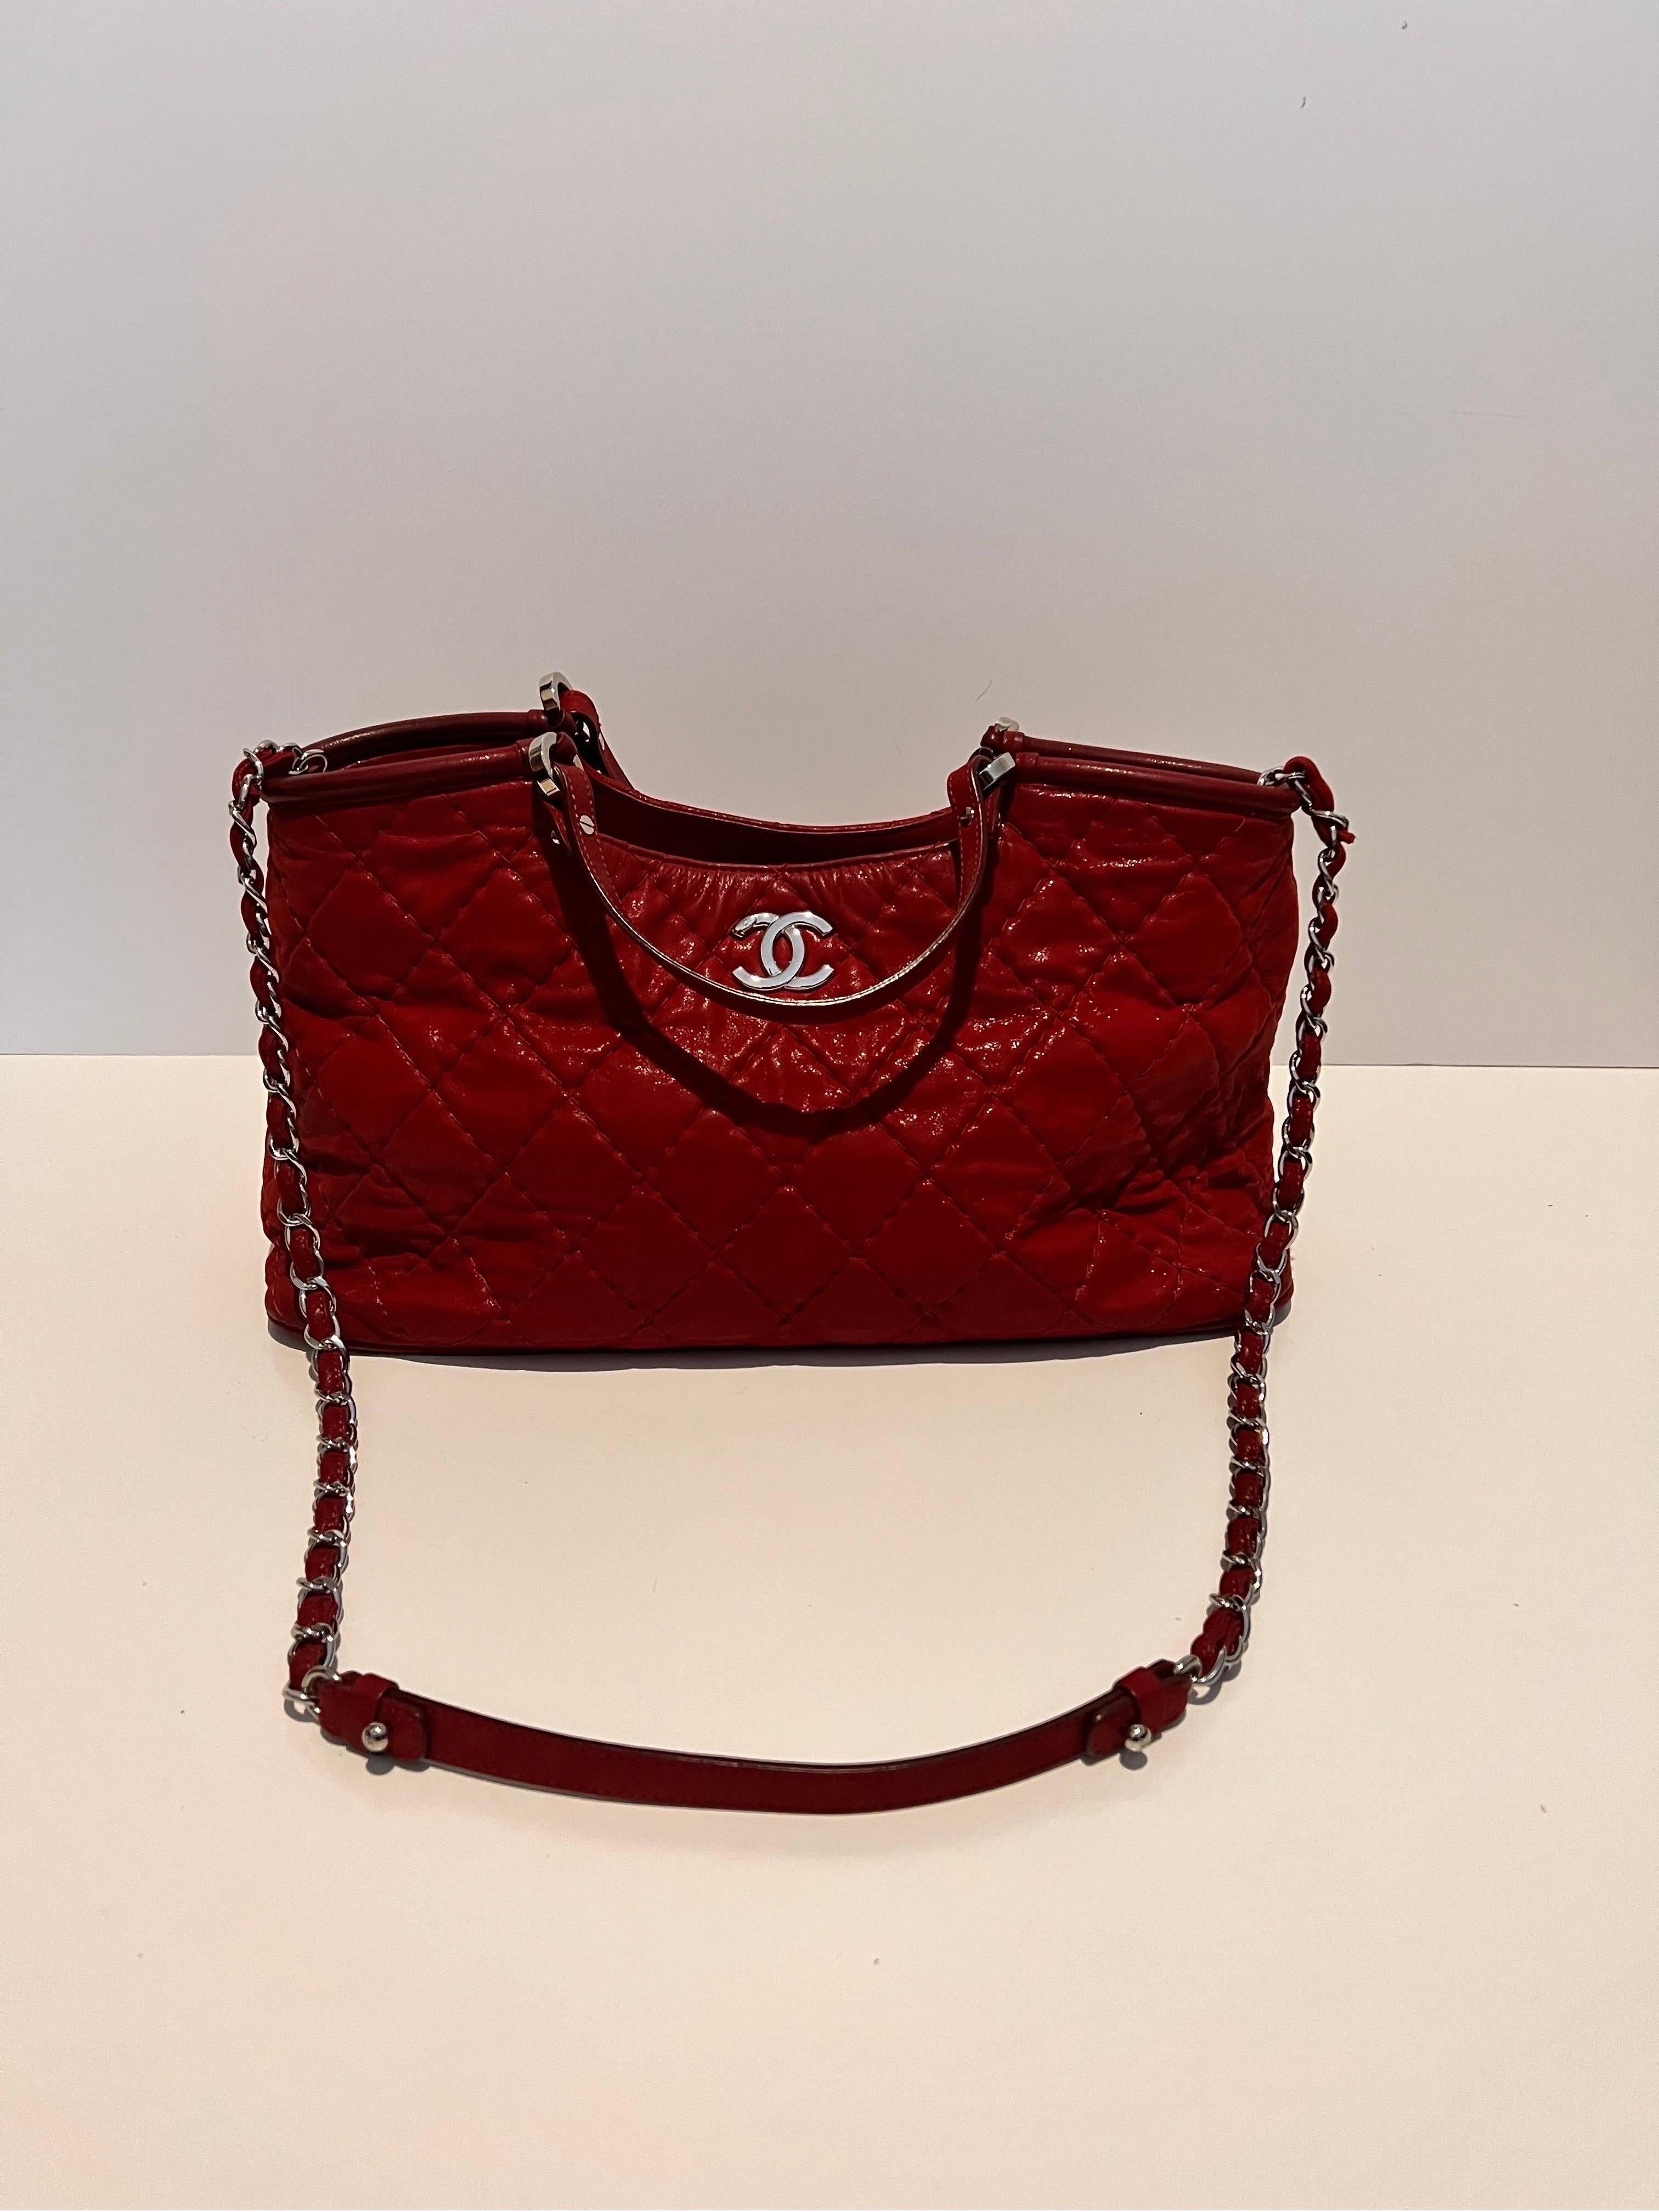 Stunning and sexy bright red Chanel tote, top handle hand bag. 
Beautiful with some signs of wear. See images.
A truly unique and classic item. 